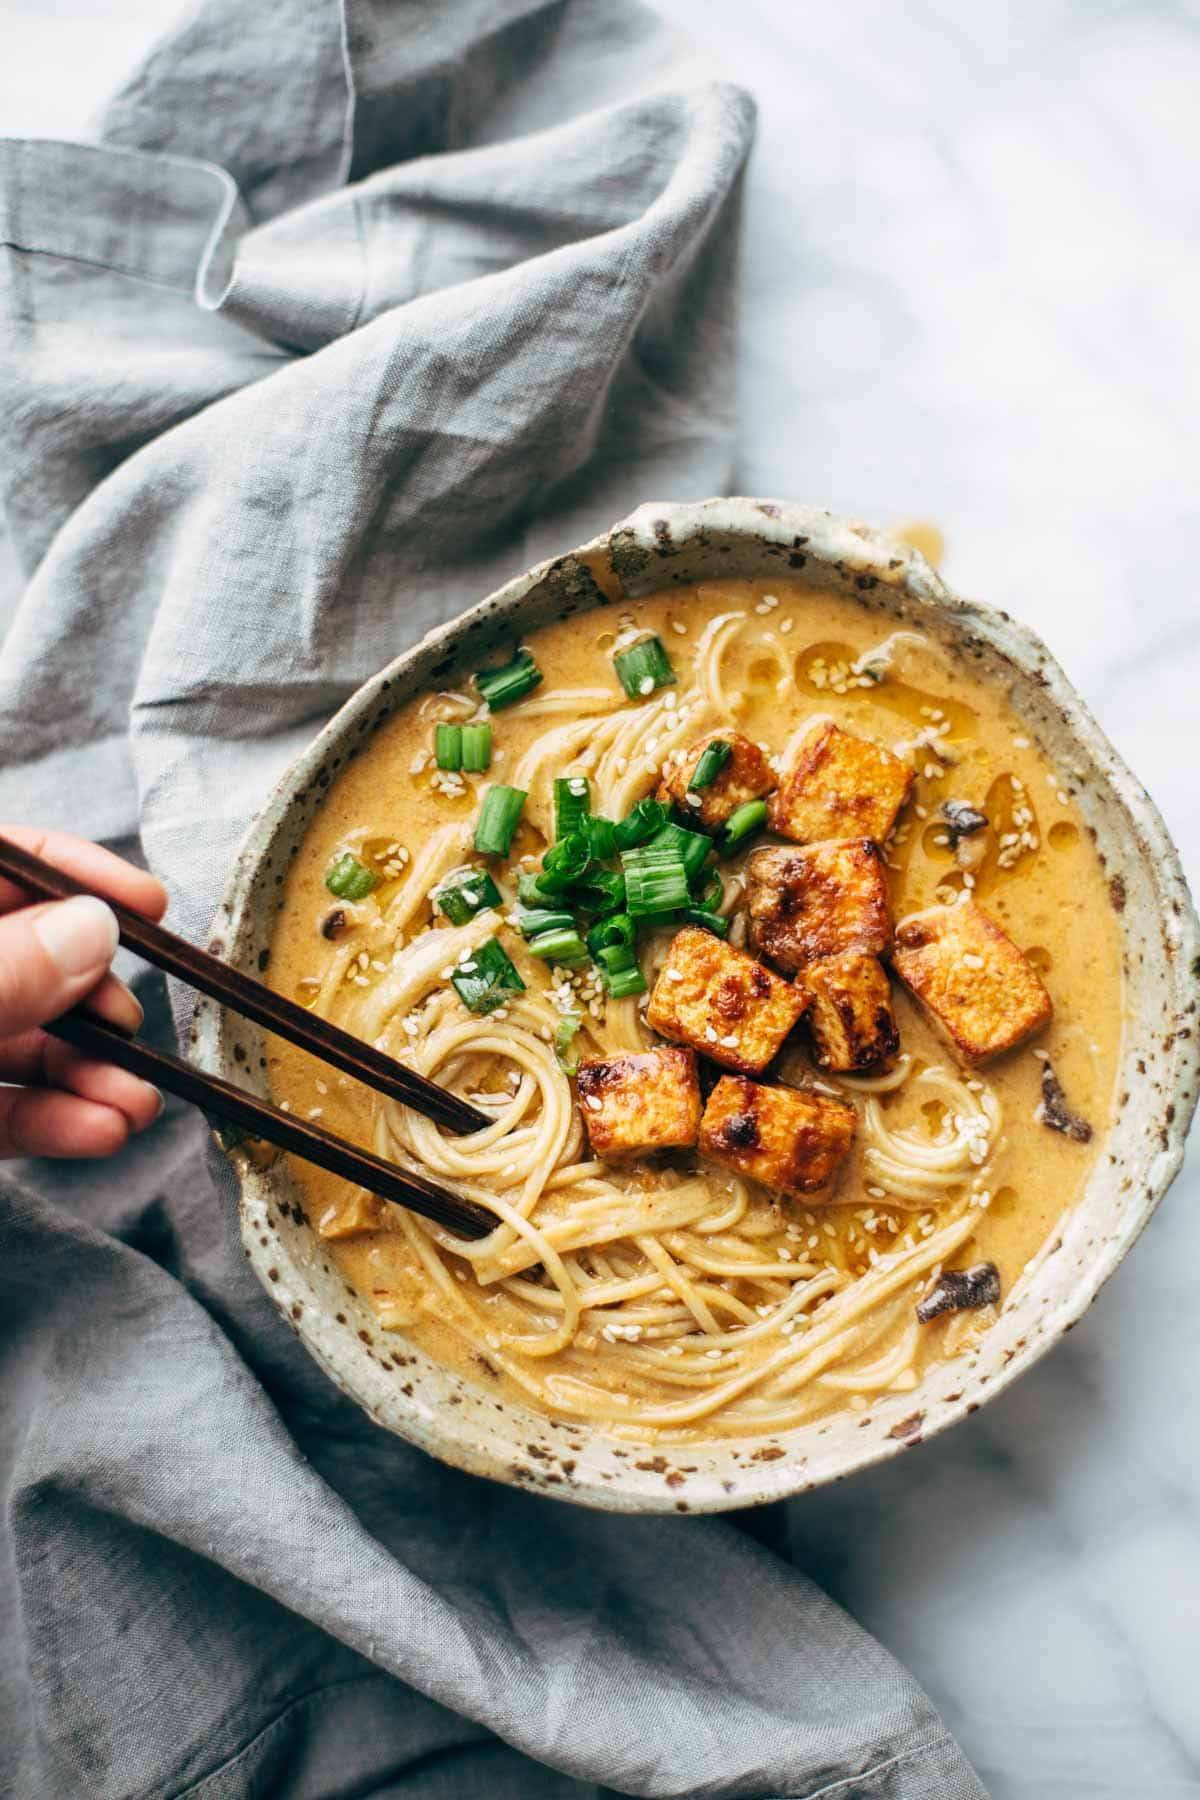 Homemade Spicy Ramen recipe with an easy spicy miso paste for the broth and dry ramen noodles that taste JUST like fresh! Vegetarian / vegan. | pinchofyum.com